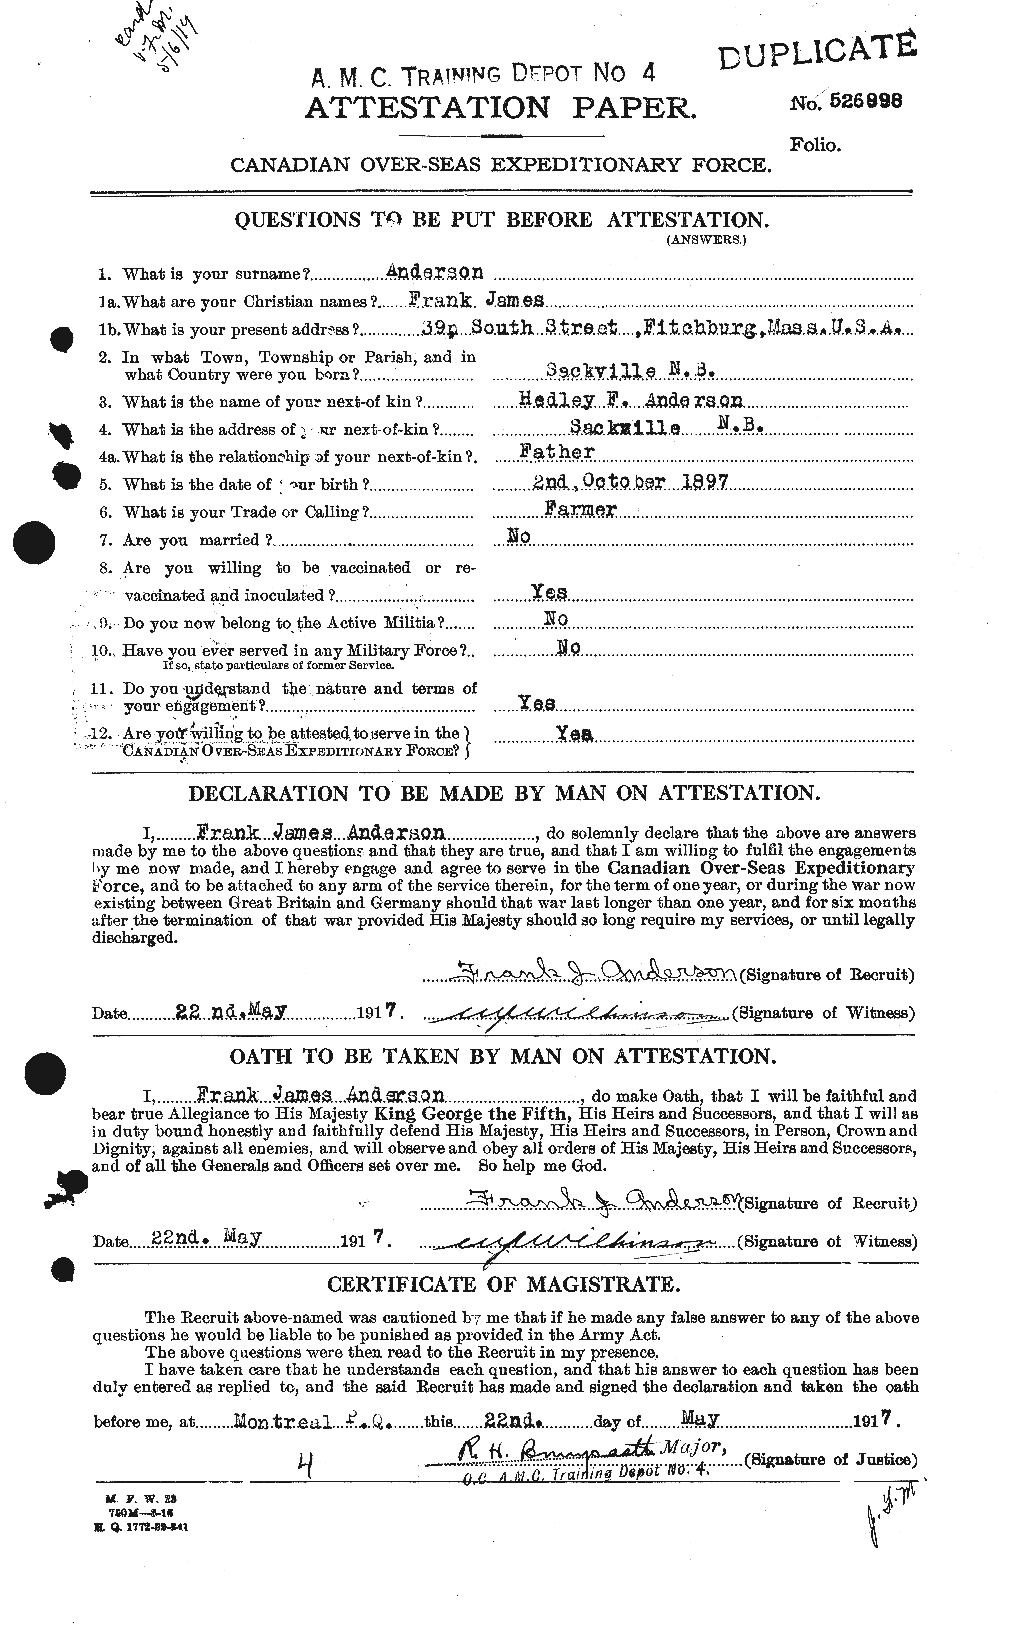 Personnel Records of the First World War - CEF 209846a